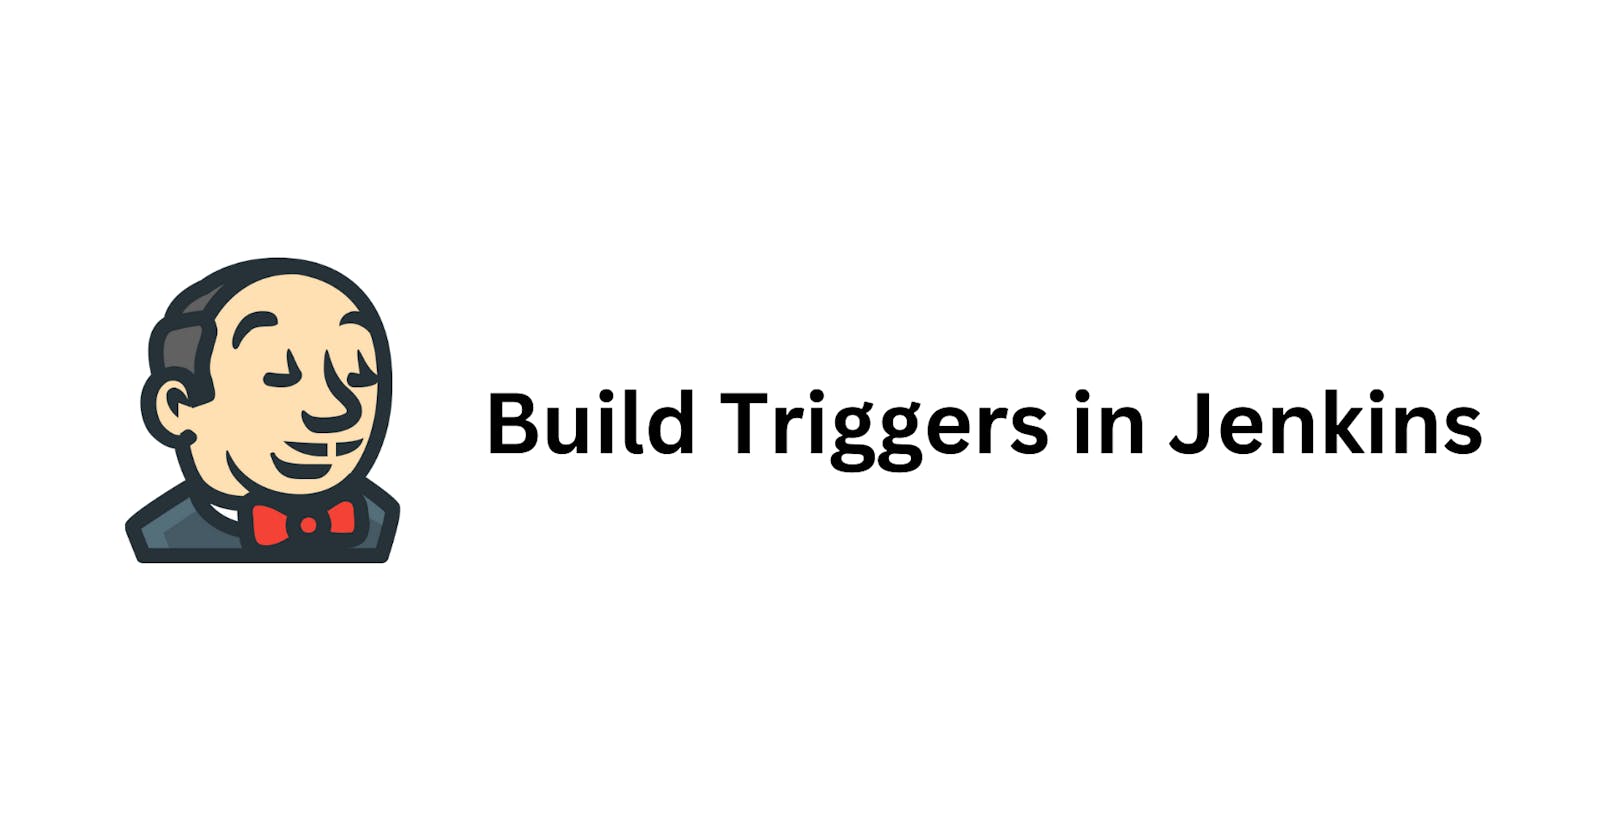 Build Triggers in Jenkins: Enhancing Automation and Efficiency